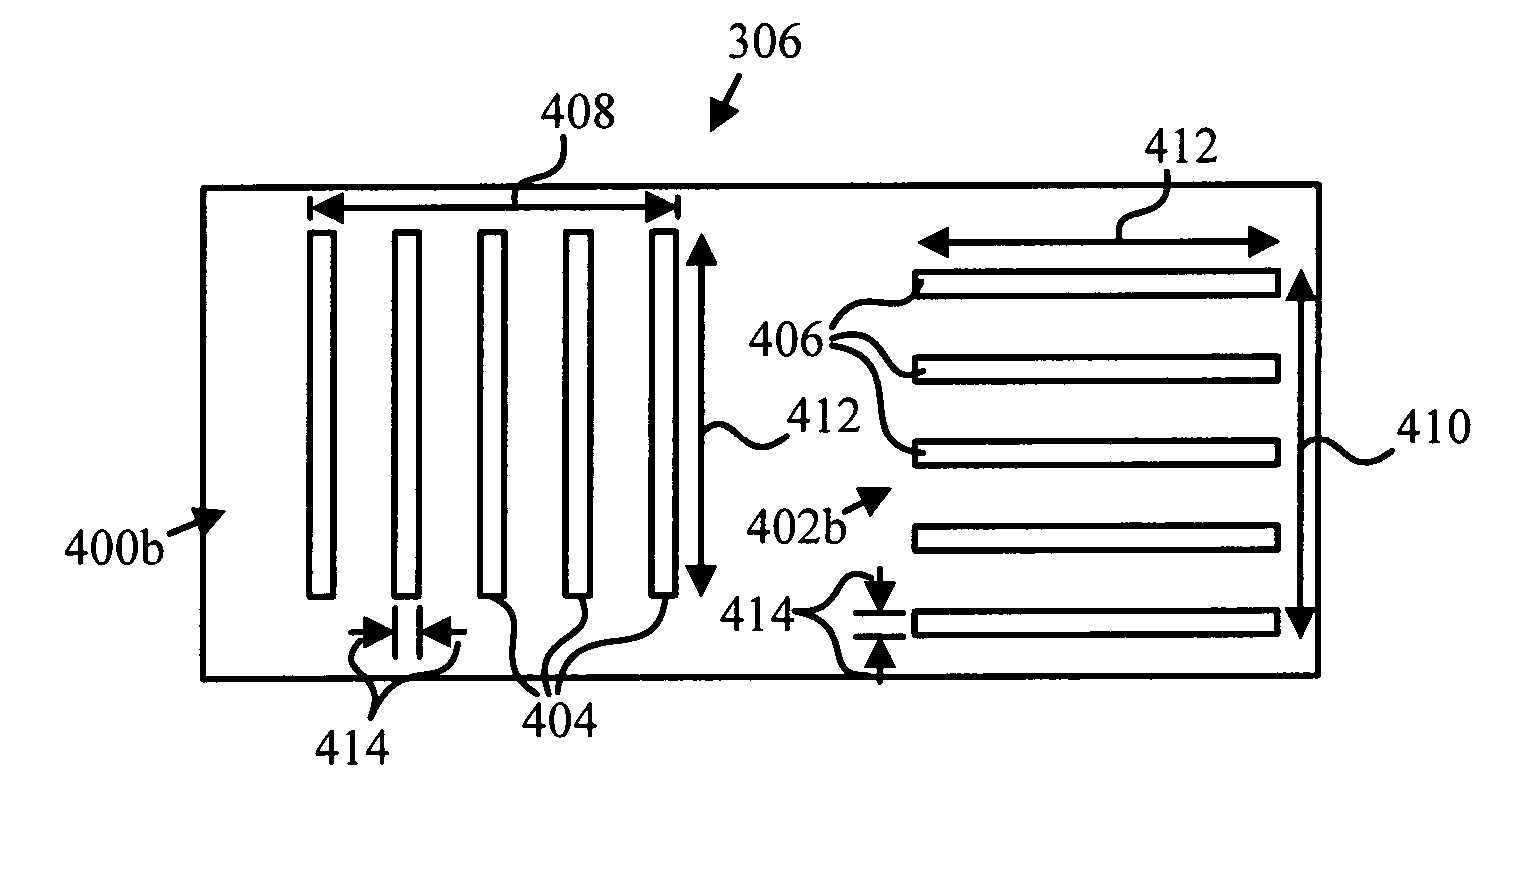 Multi-layer registration and dimensional test mark for scatterometrical measurement